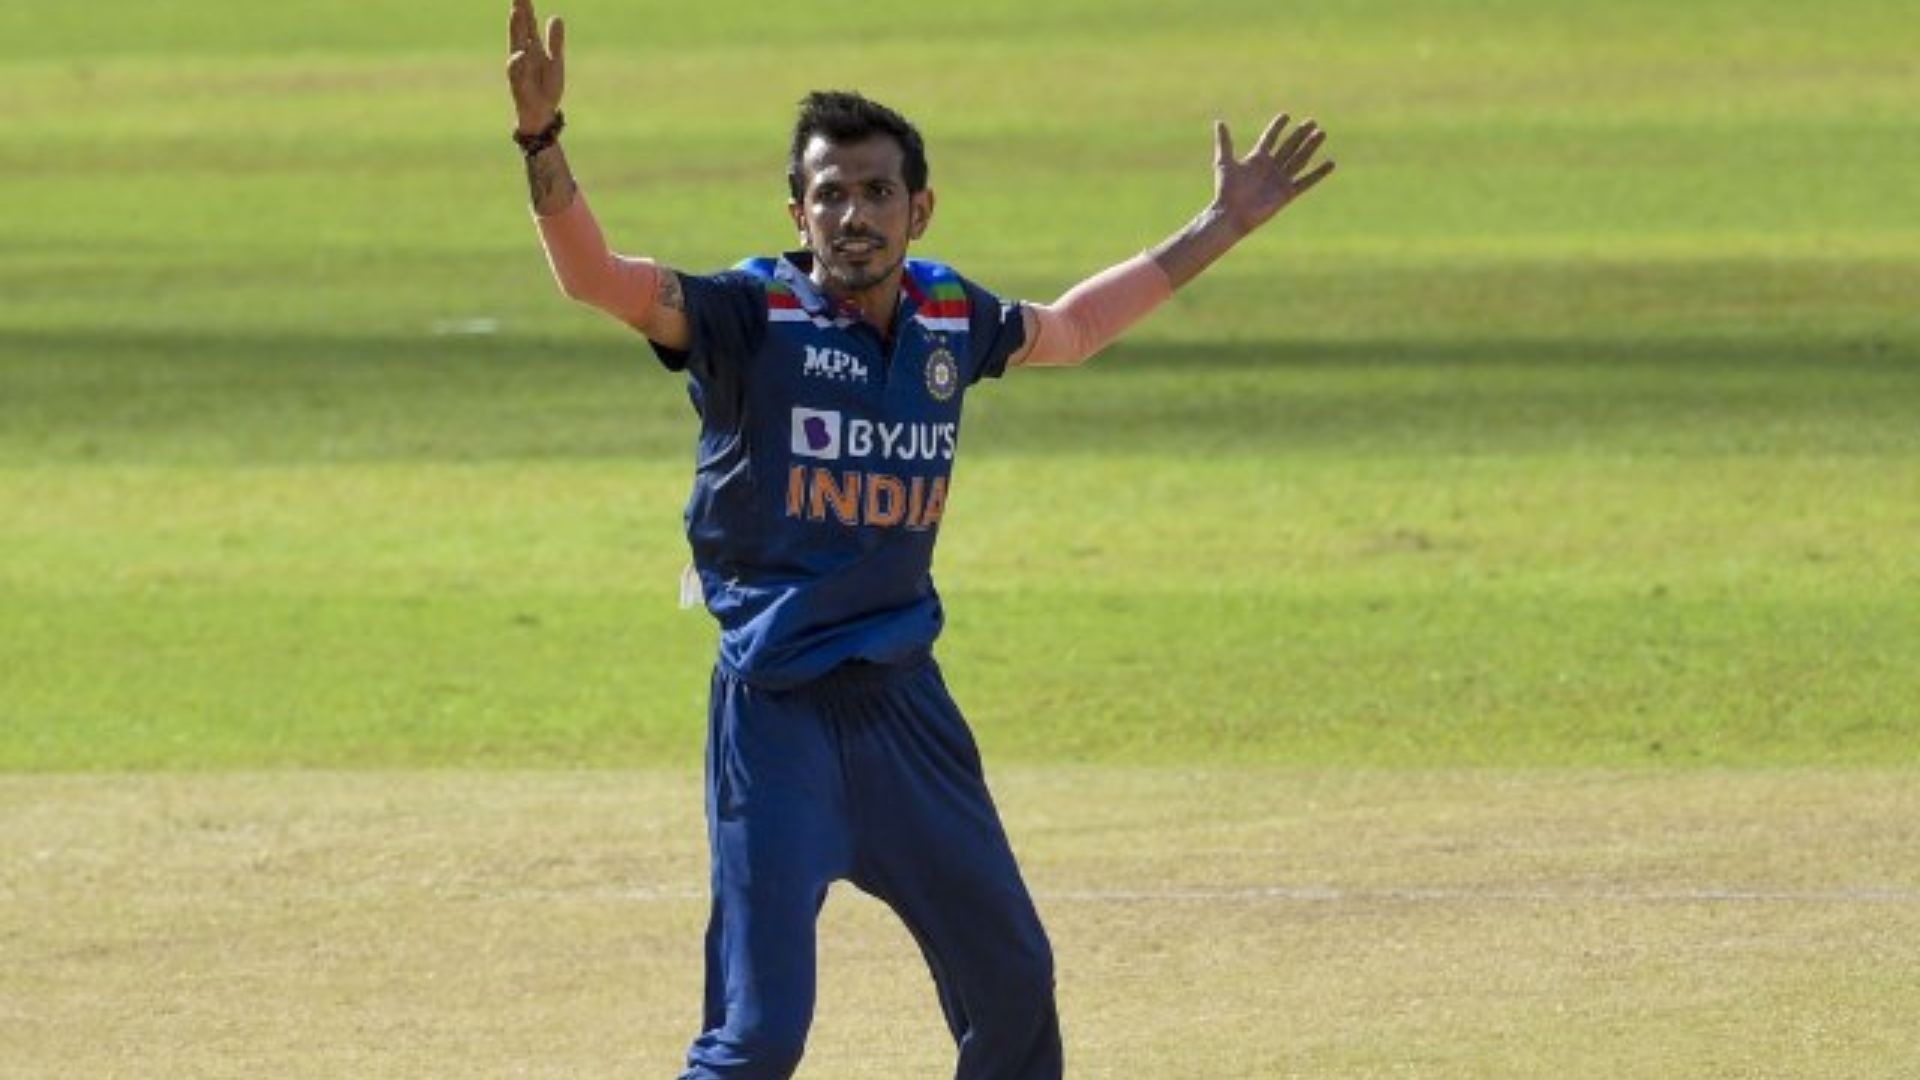 Yuzvendra Chahal is yet to play a T20 World Cup game. (P.C.:Twitter)